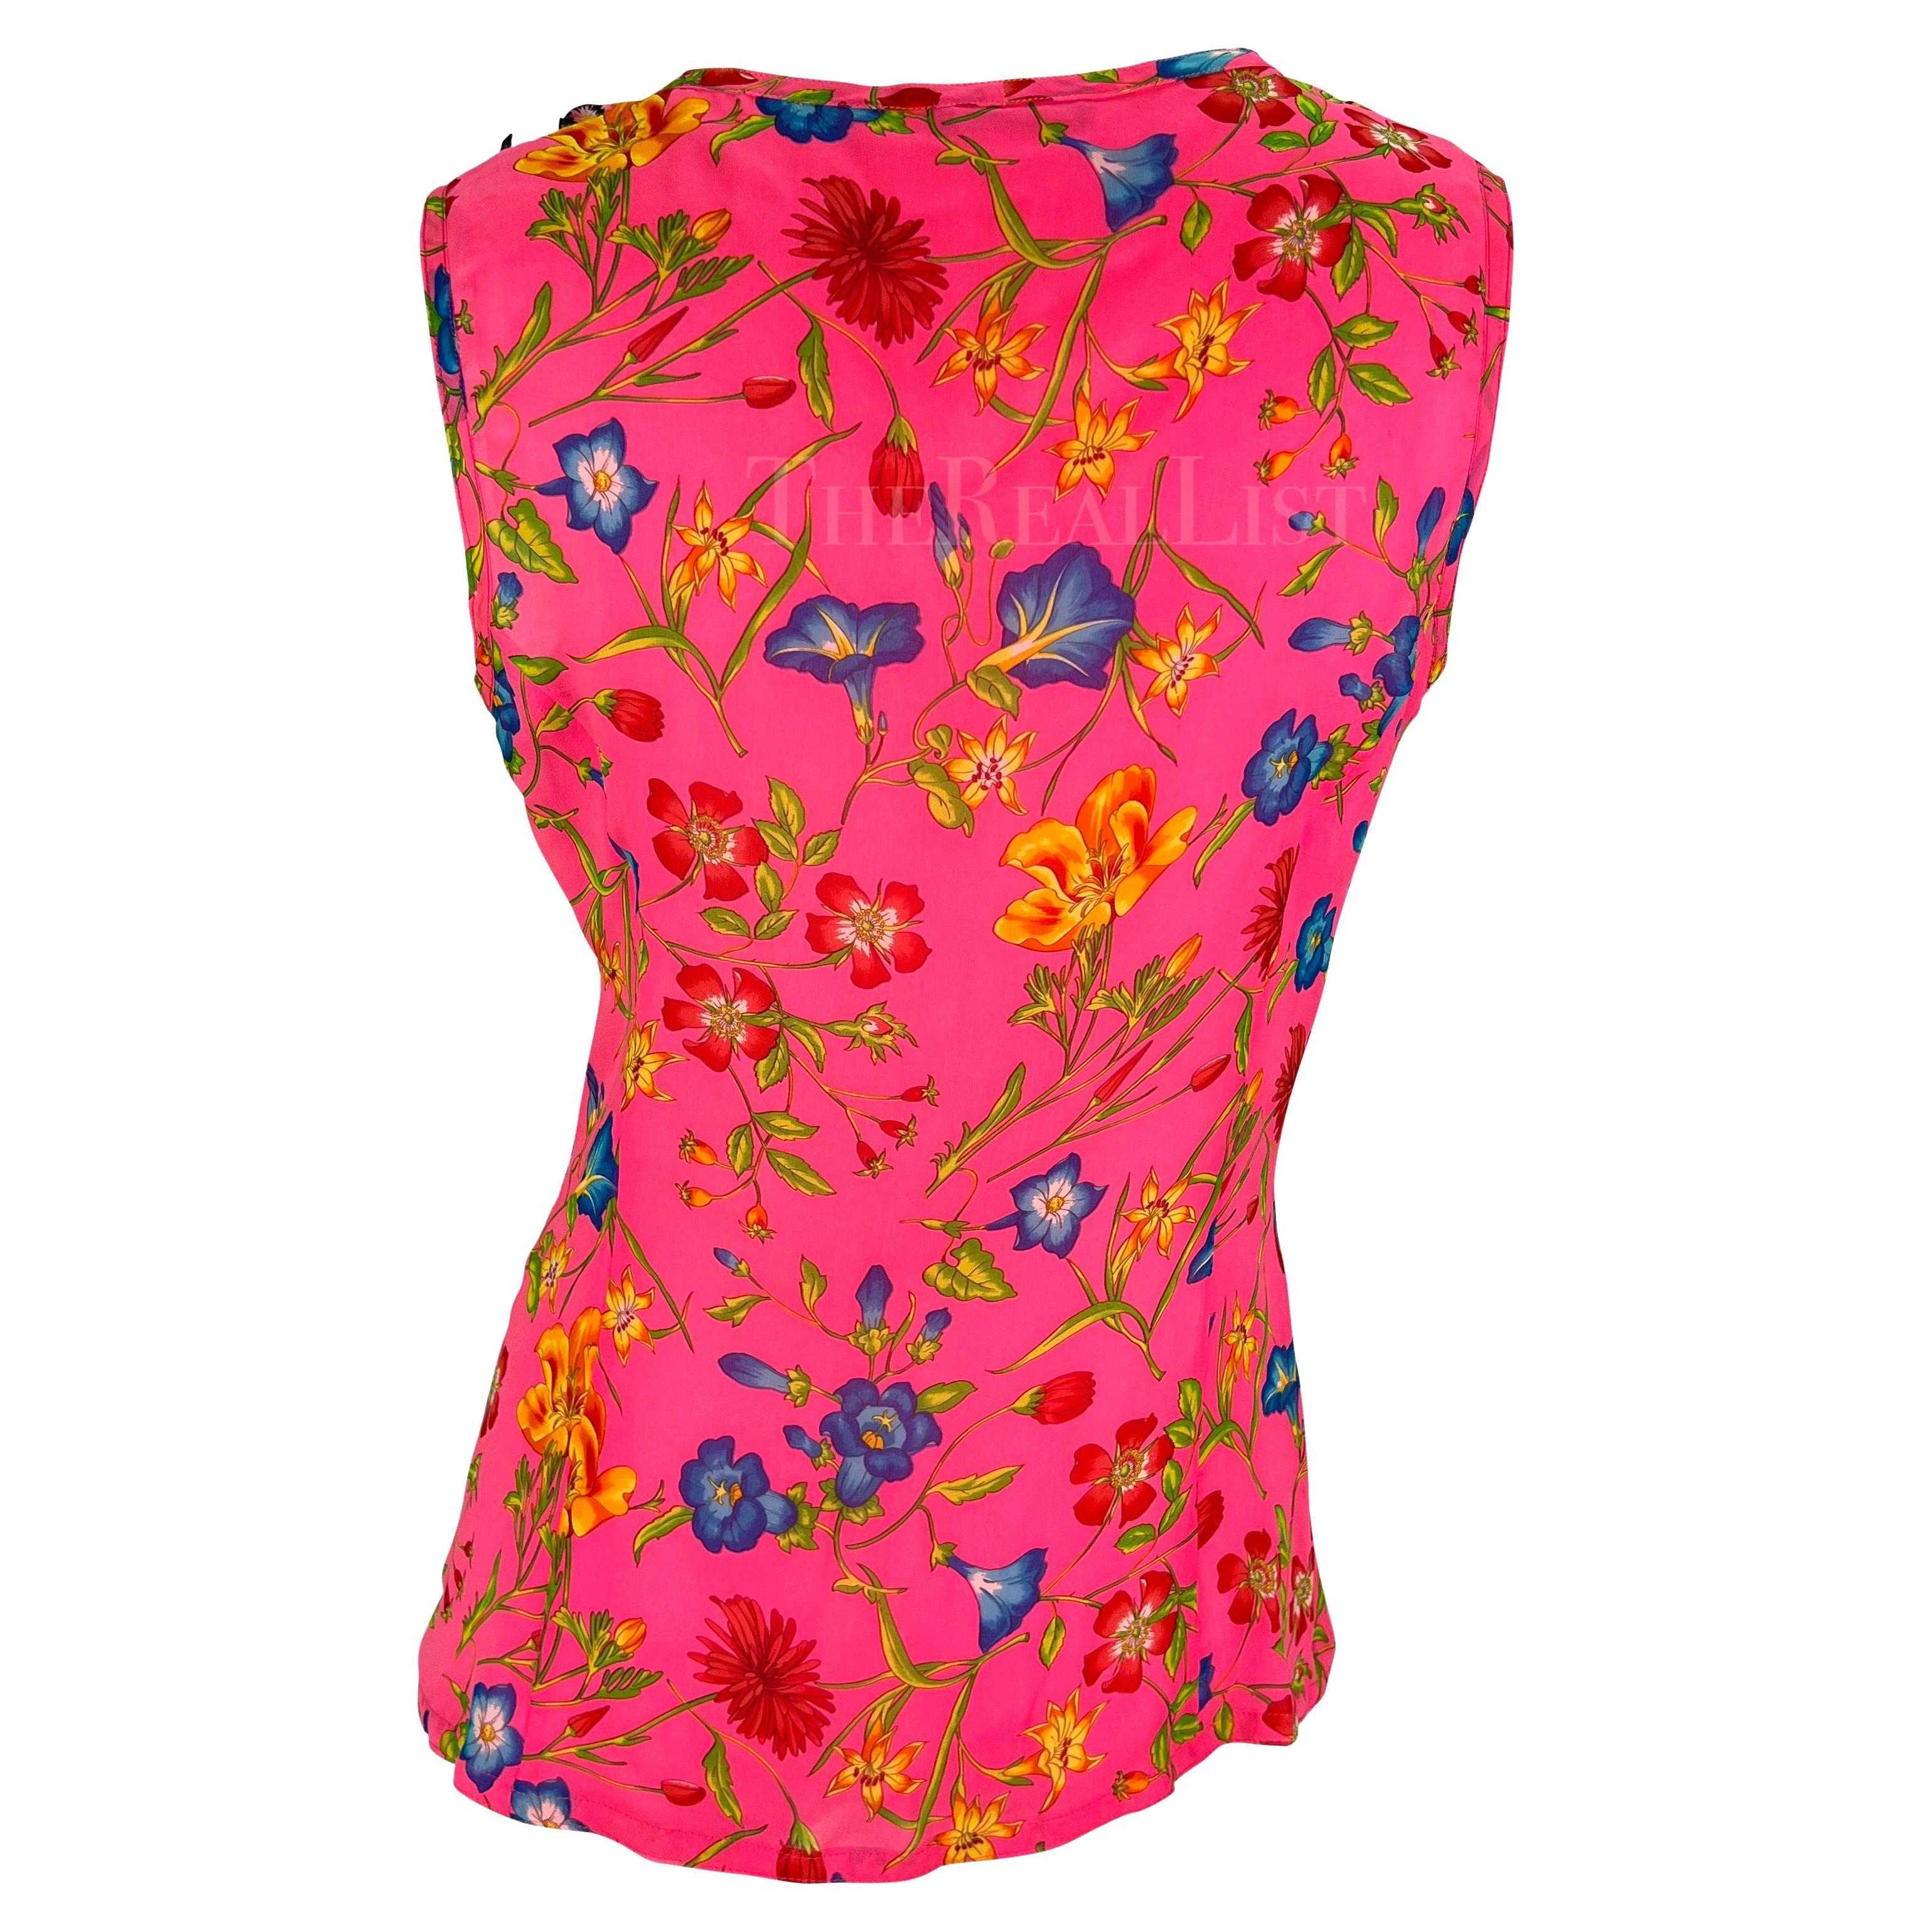 S/S 1993 Gianni Versace Runway Pink Floral Ruffle Medusa Sleeveless Top For Sale 3